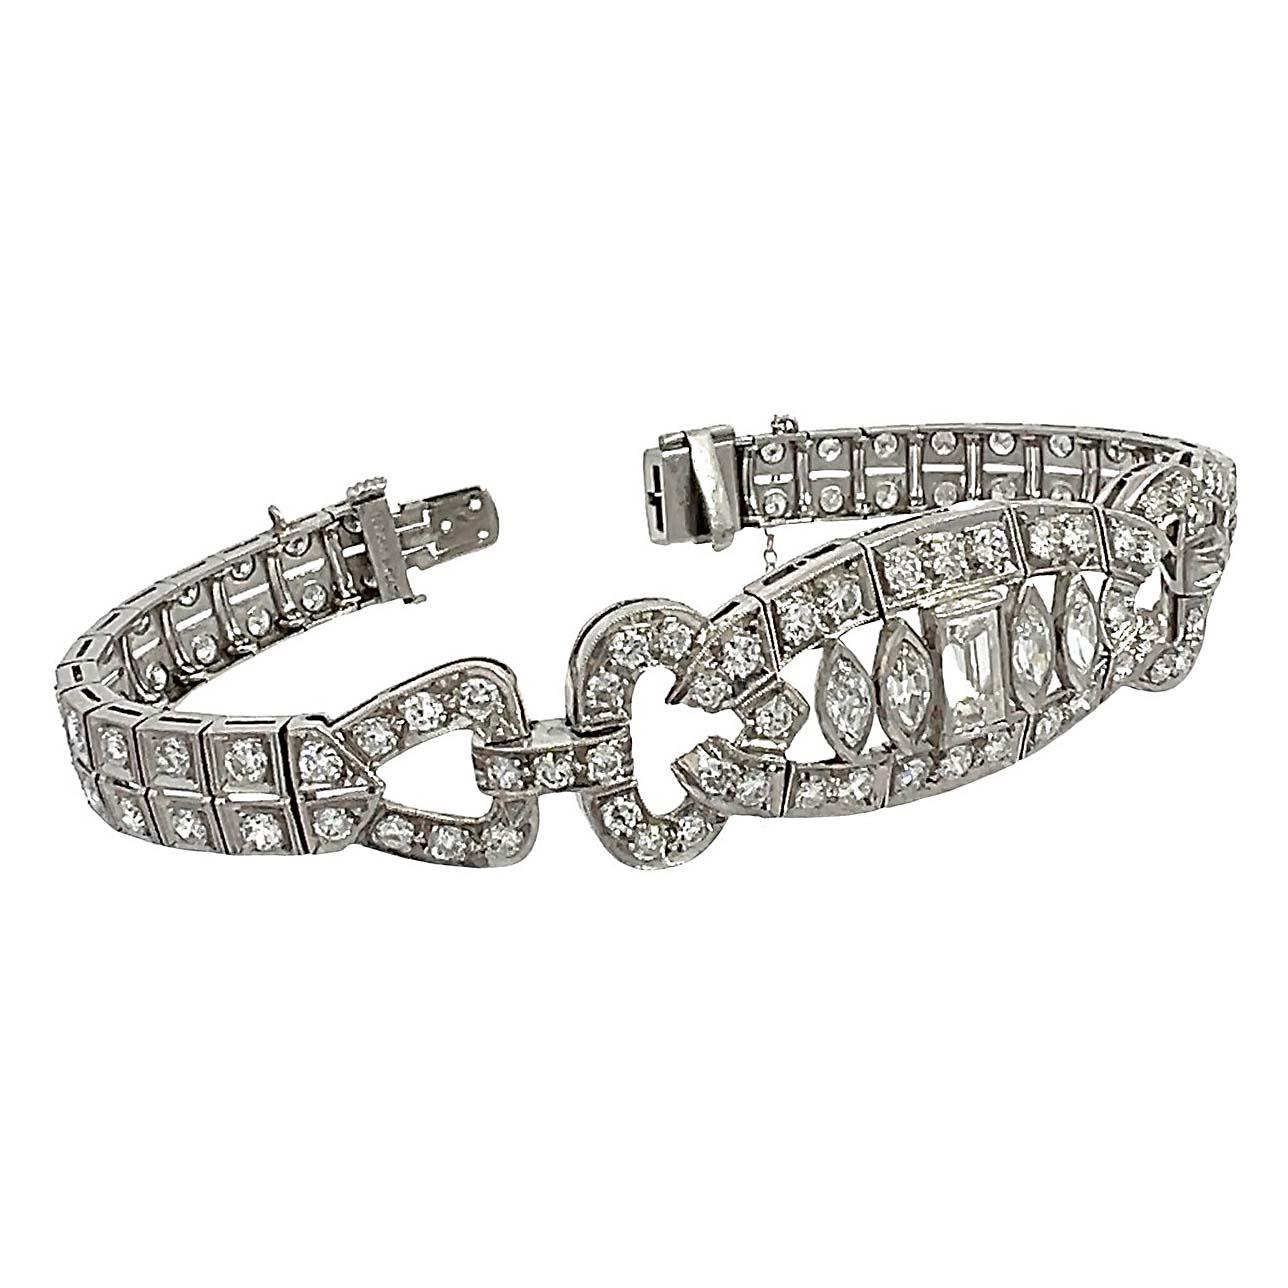 Antique Art Deco Diamond bracelet meticulously crafted with 4.5 to 5 carats of old European, baguette, and marquise-cut diamonds. The double-row diamond line bracelet has a wider central motif of marquise and baguette cut diamonds. The impressive